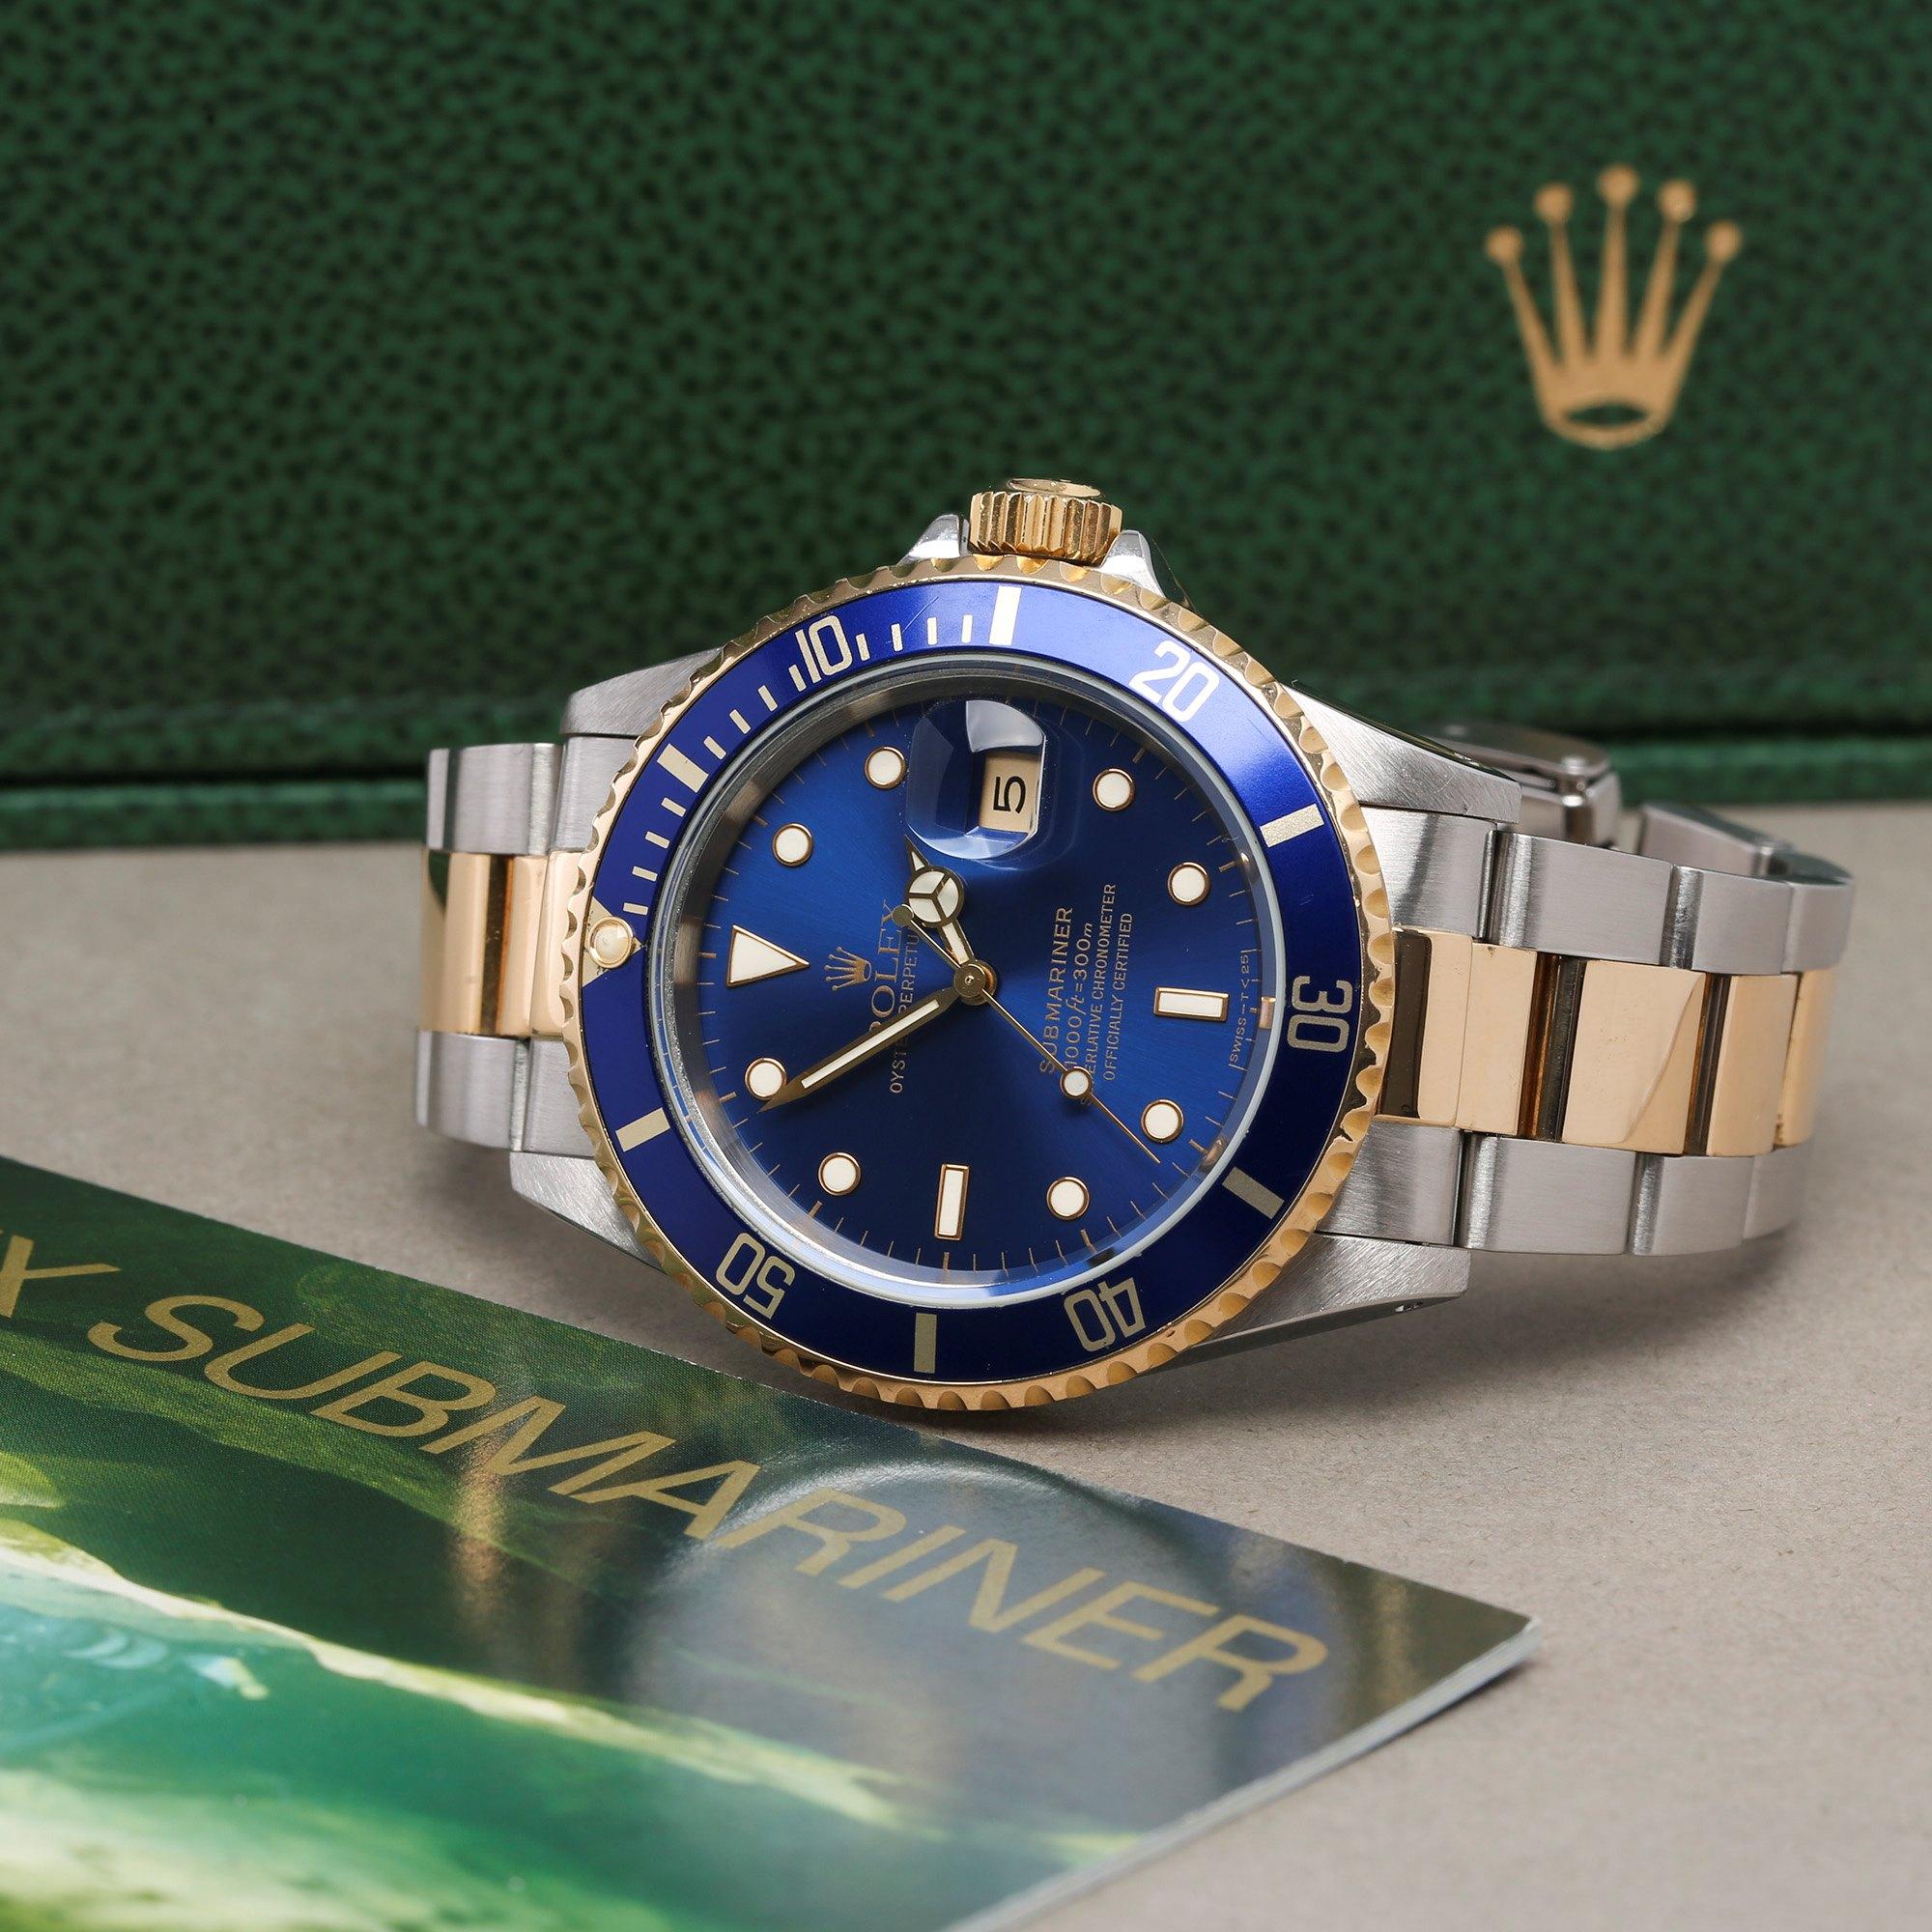 Rolex Submariner Date 16613 Men's Stainless Steel and Yellow Gold Watch 6